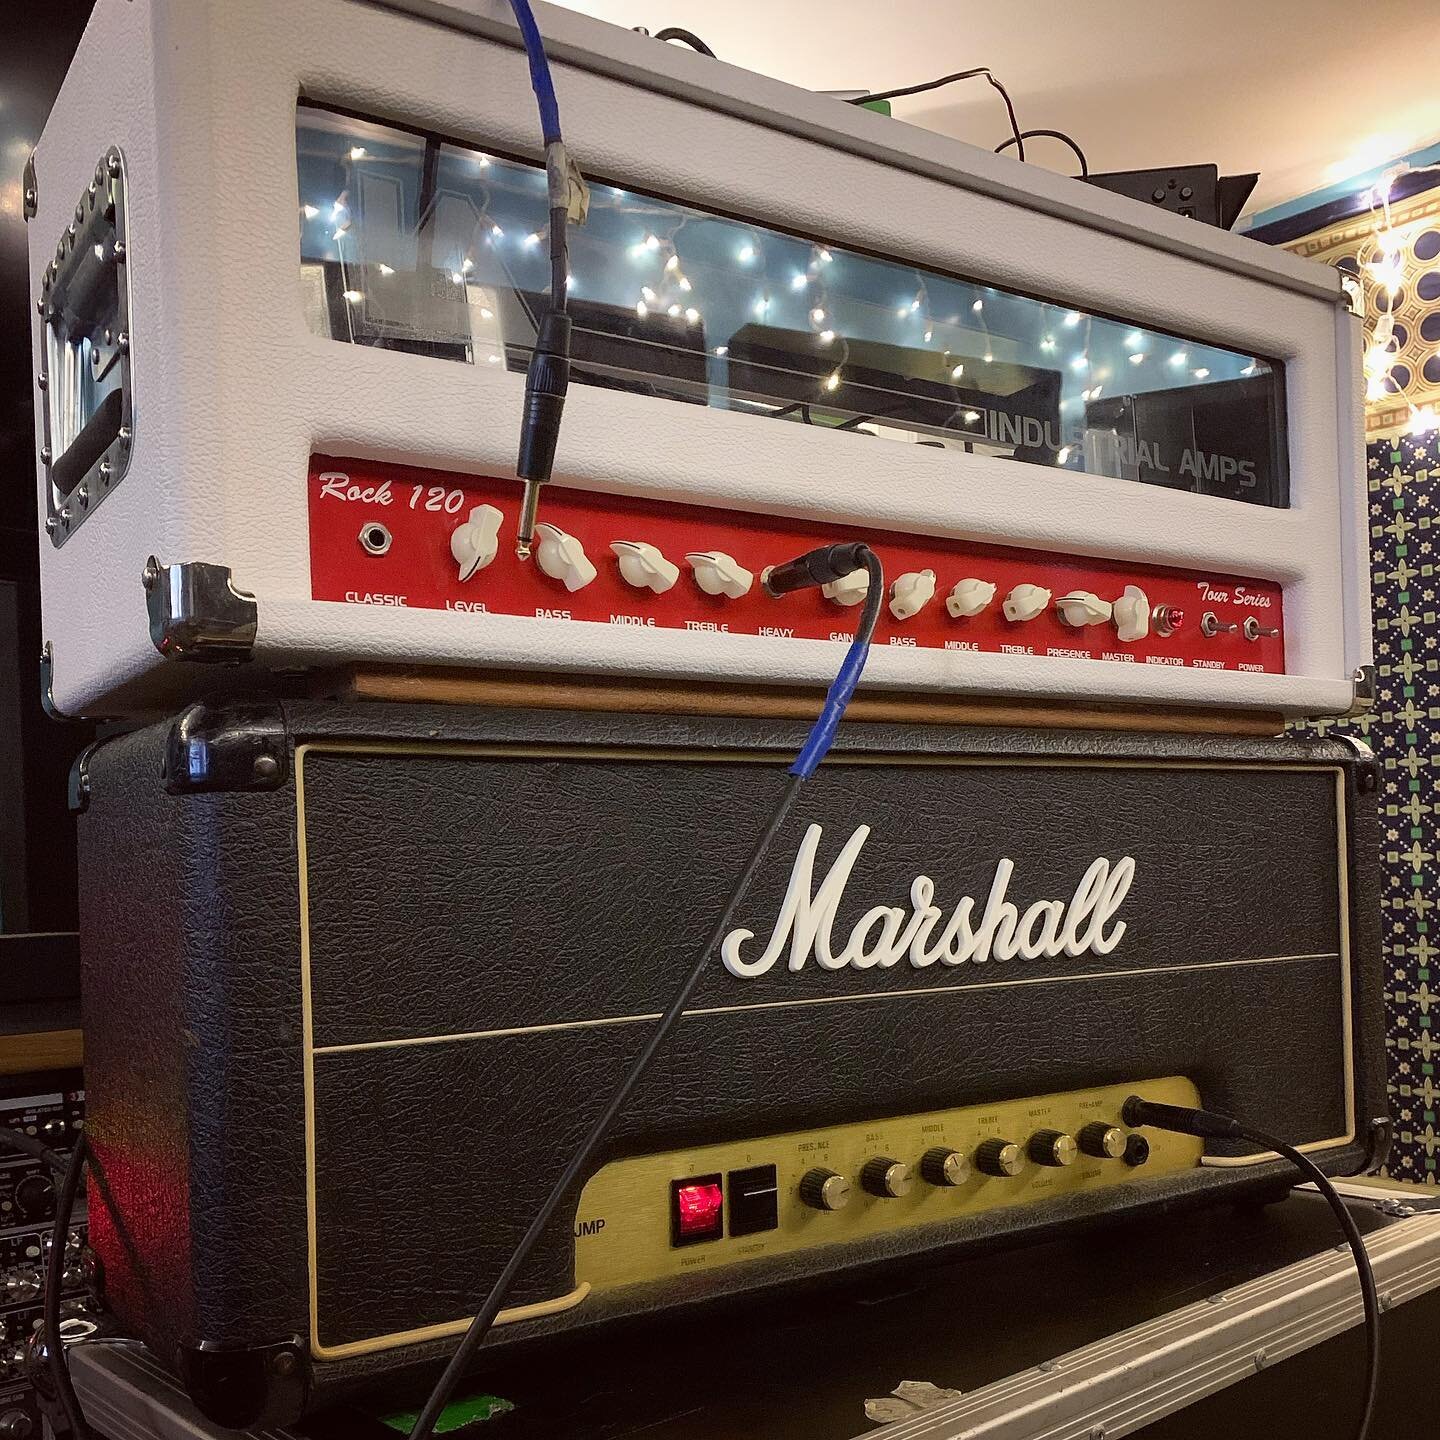 #fbf to a killer reamp session with @halfheardvoices - I don&rsquo;t remember much about the red guy, but it sounds mean as hell and punched it&rsquo;s weight with the JMP. That color combo looks like a blues lawyer/shred dad sorta deal, but nope - t